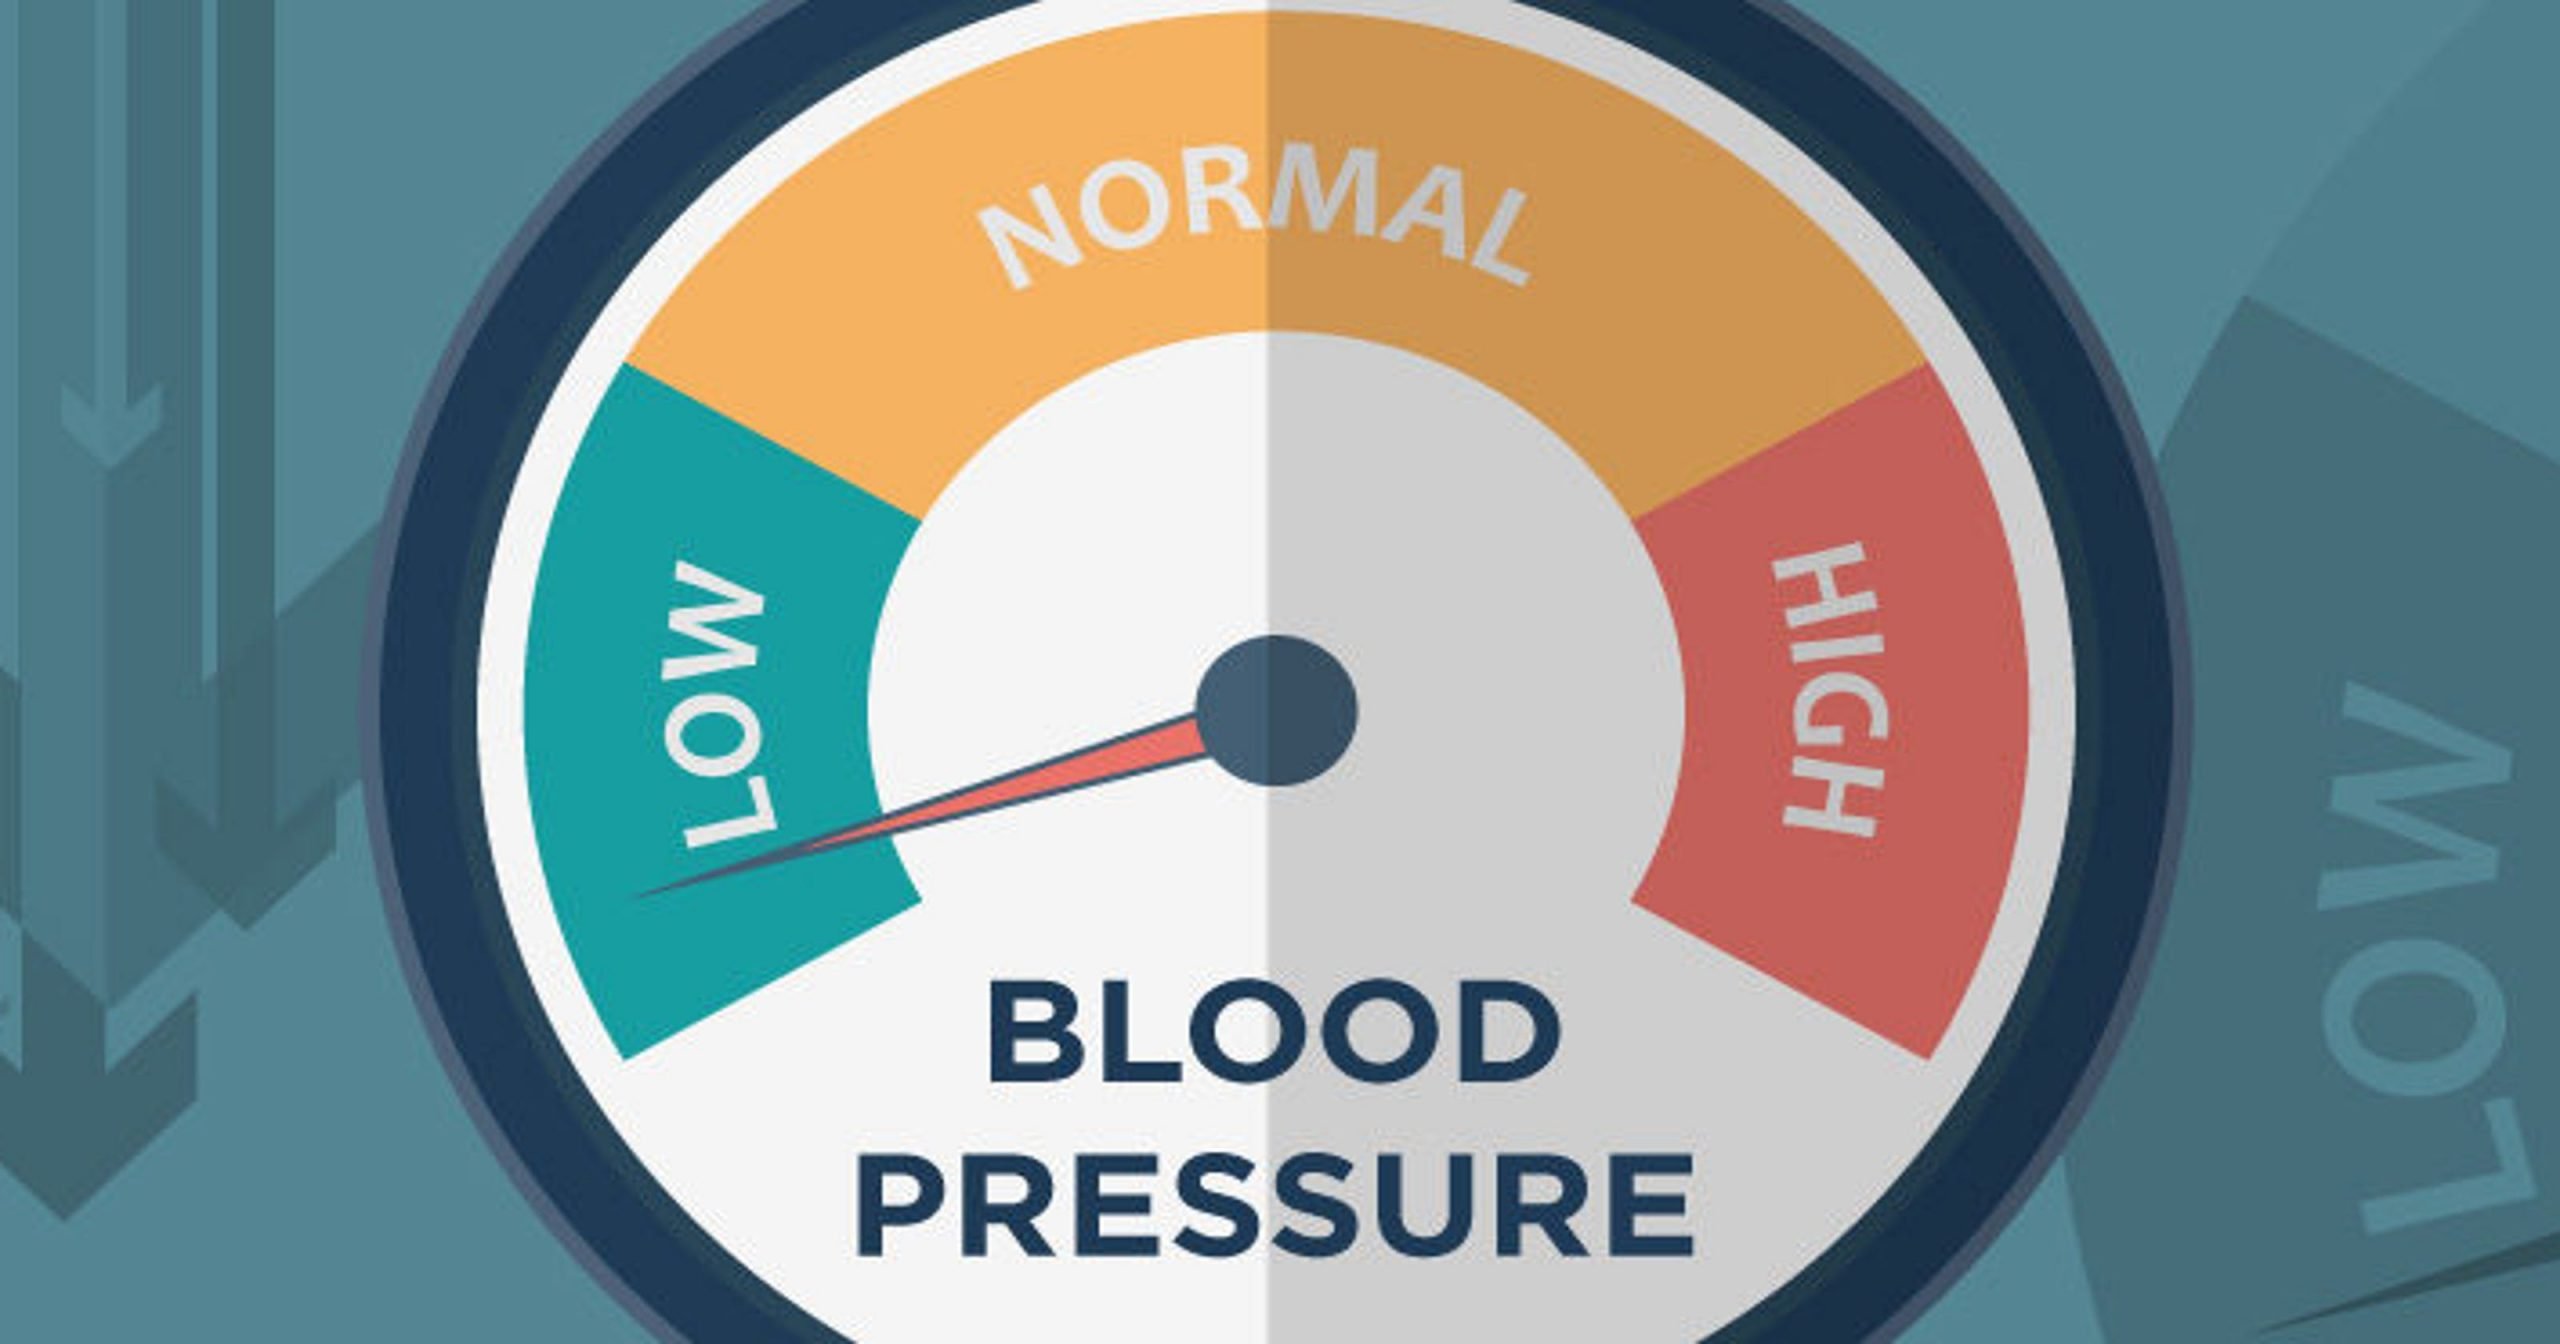 How low can your blood pressure go?